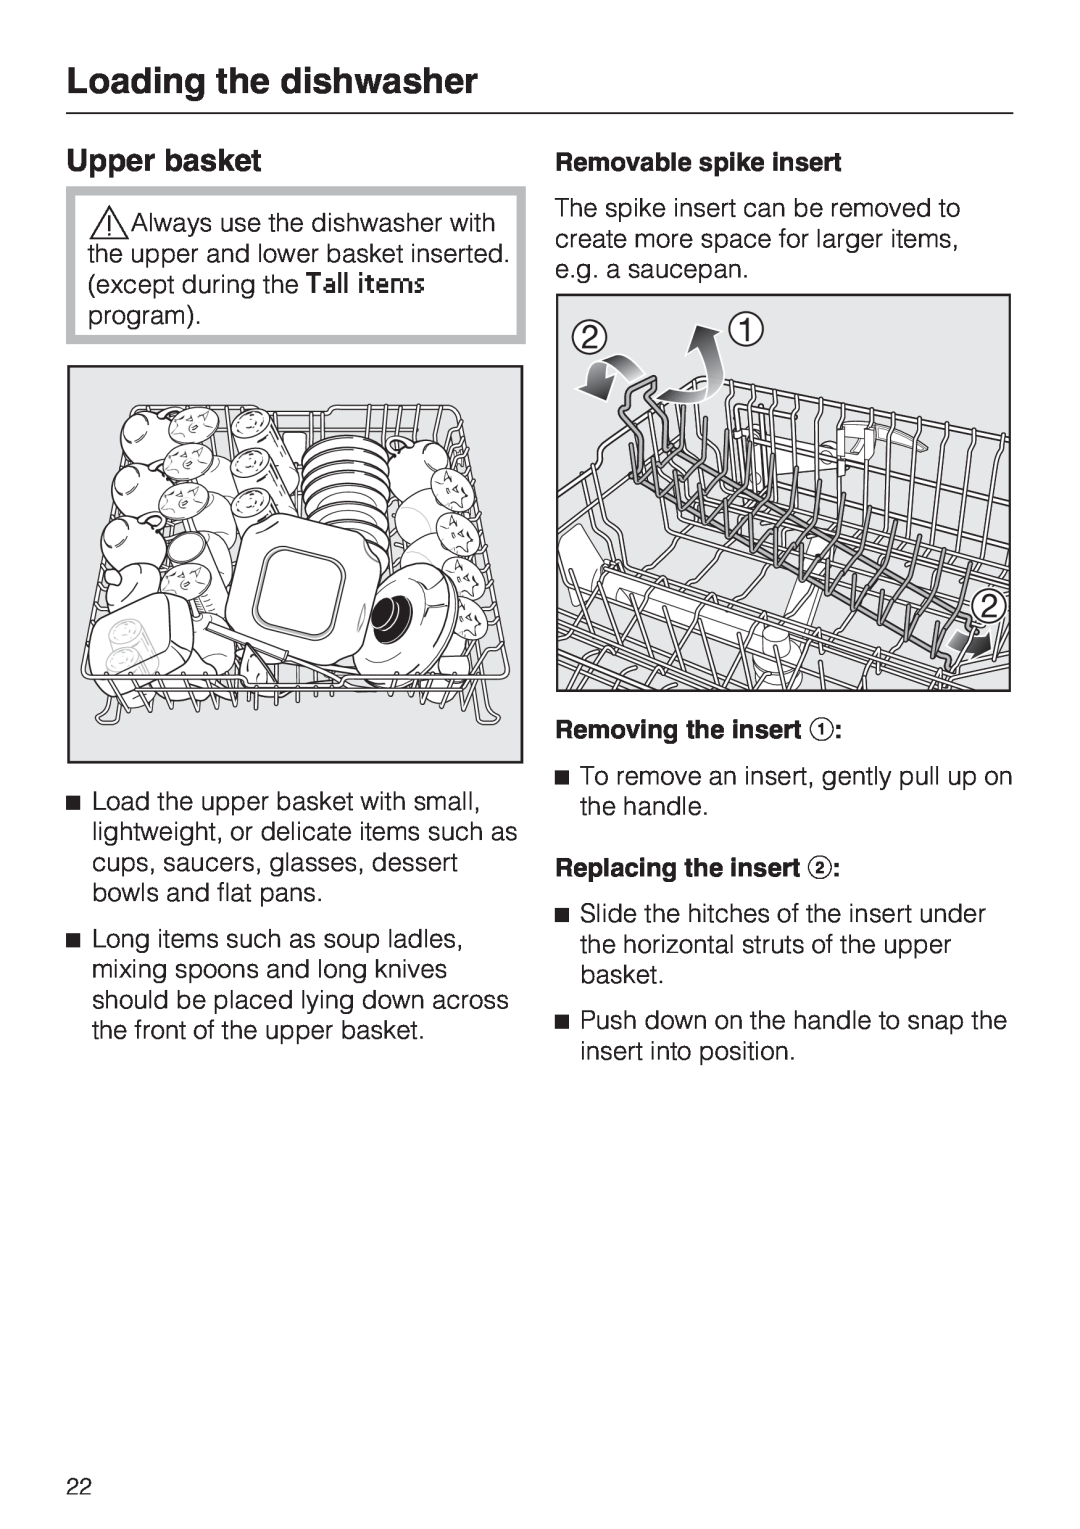 Miele G 2872 Upper basket, Loading the dishwasher, Removable spike insert, Removing the insert, Replacing the insert 